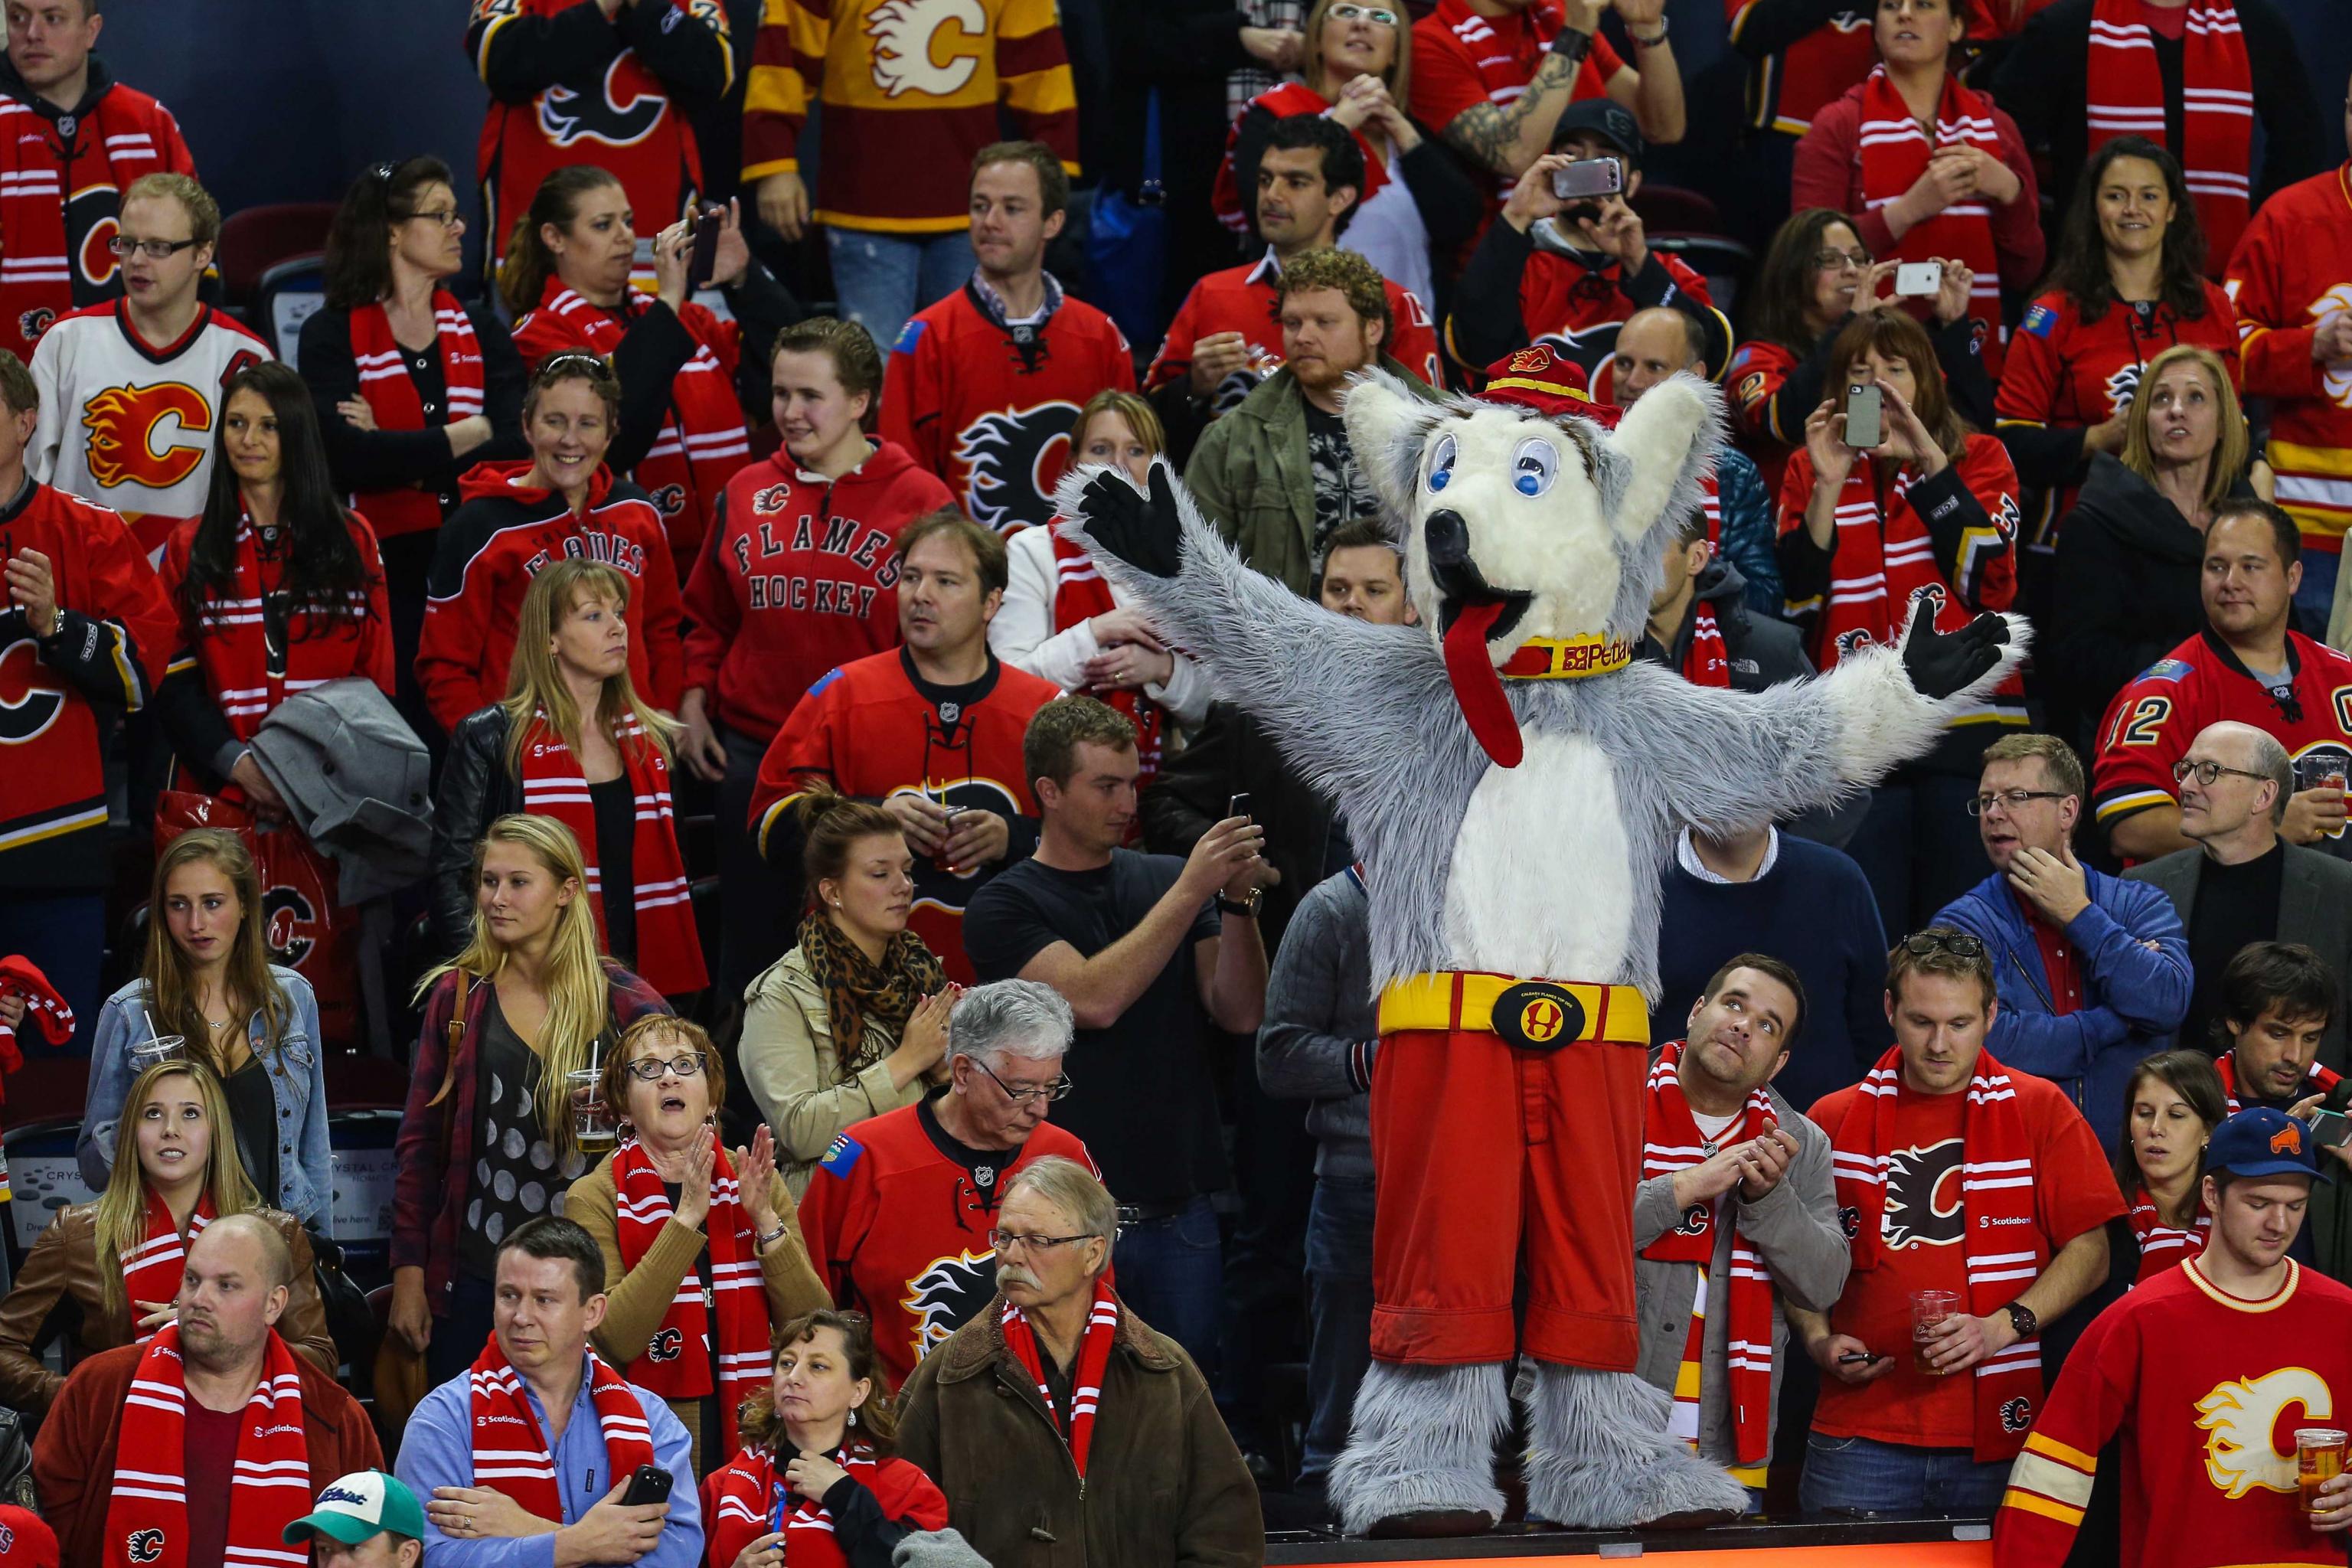 Flames mascot resurfaces after flood - The Globe and Mail